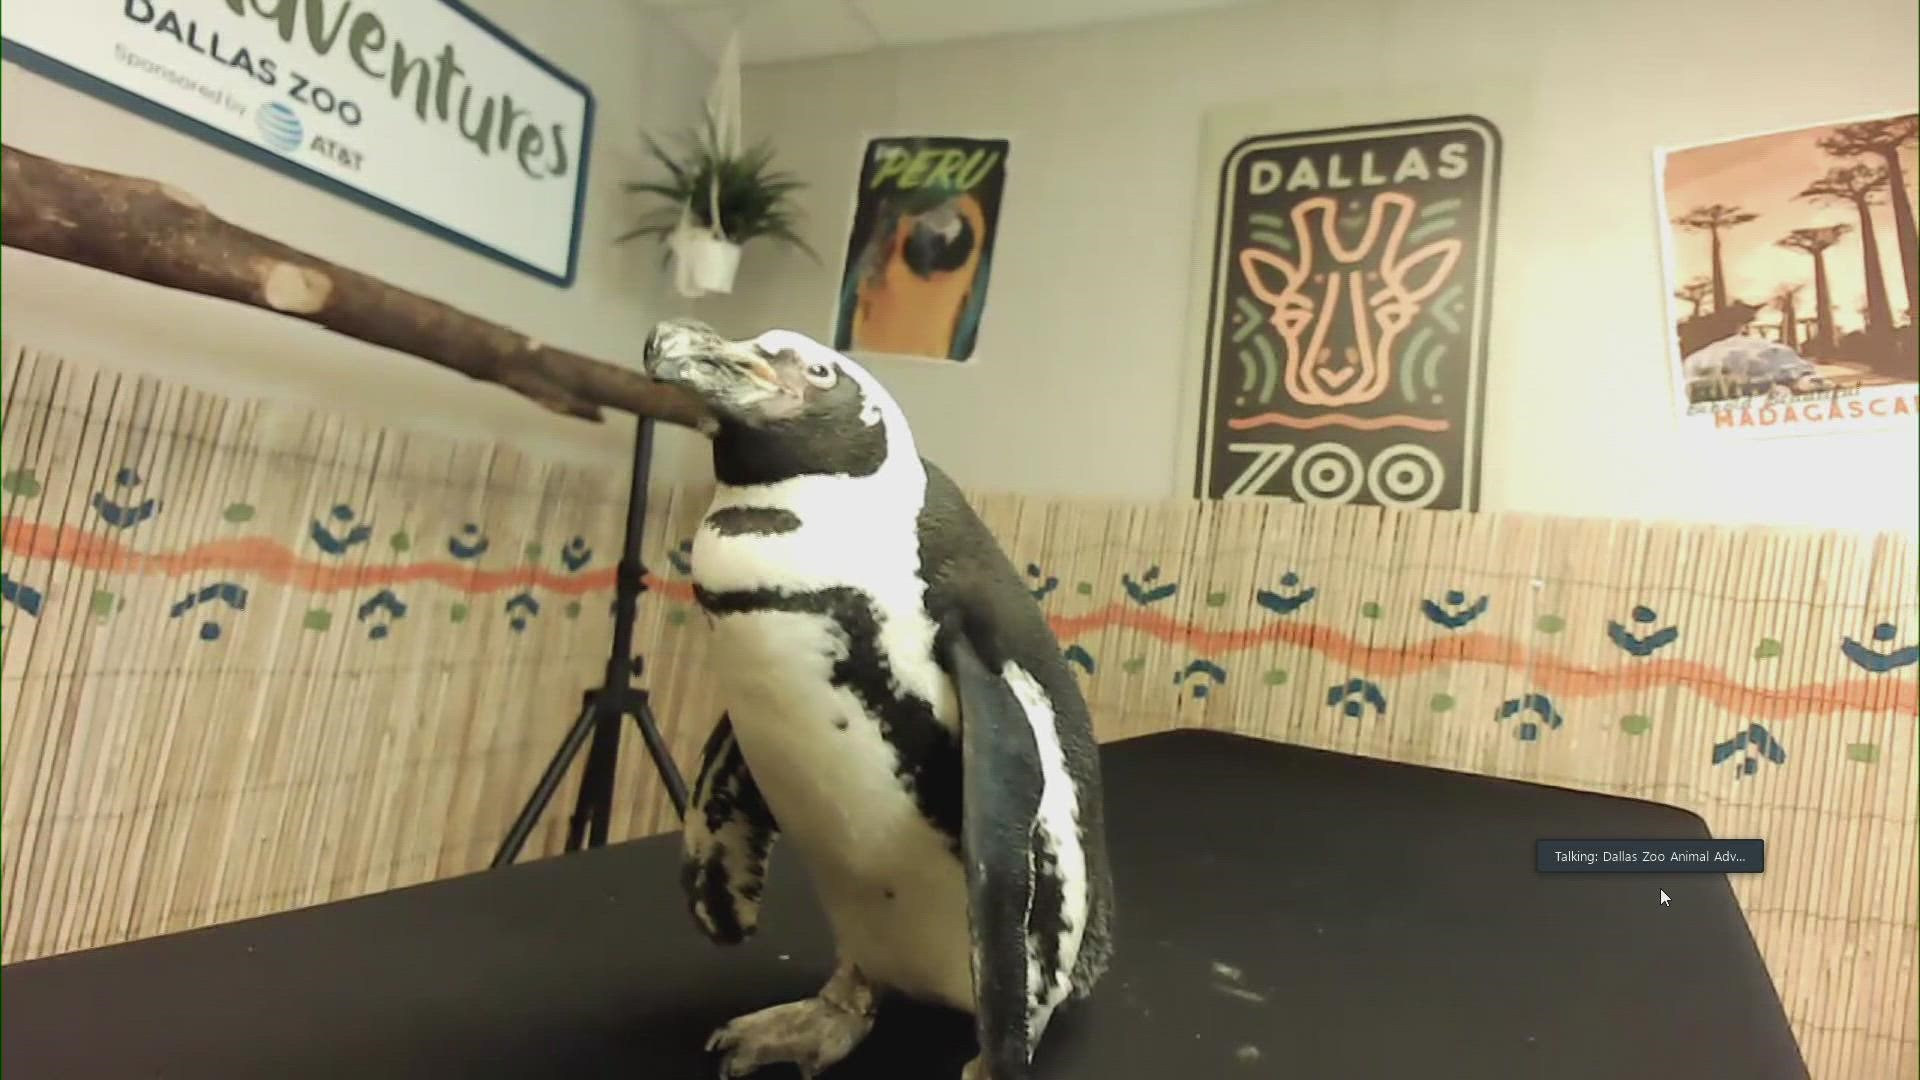 Learn more about the Dallas Zoo's penguins.